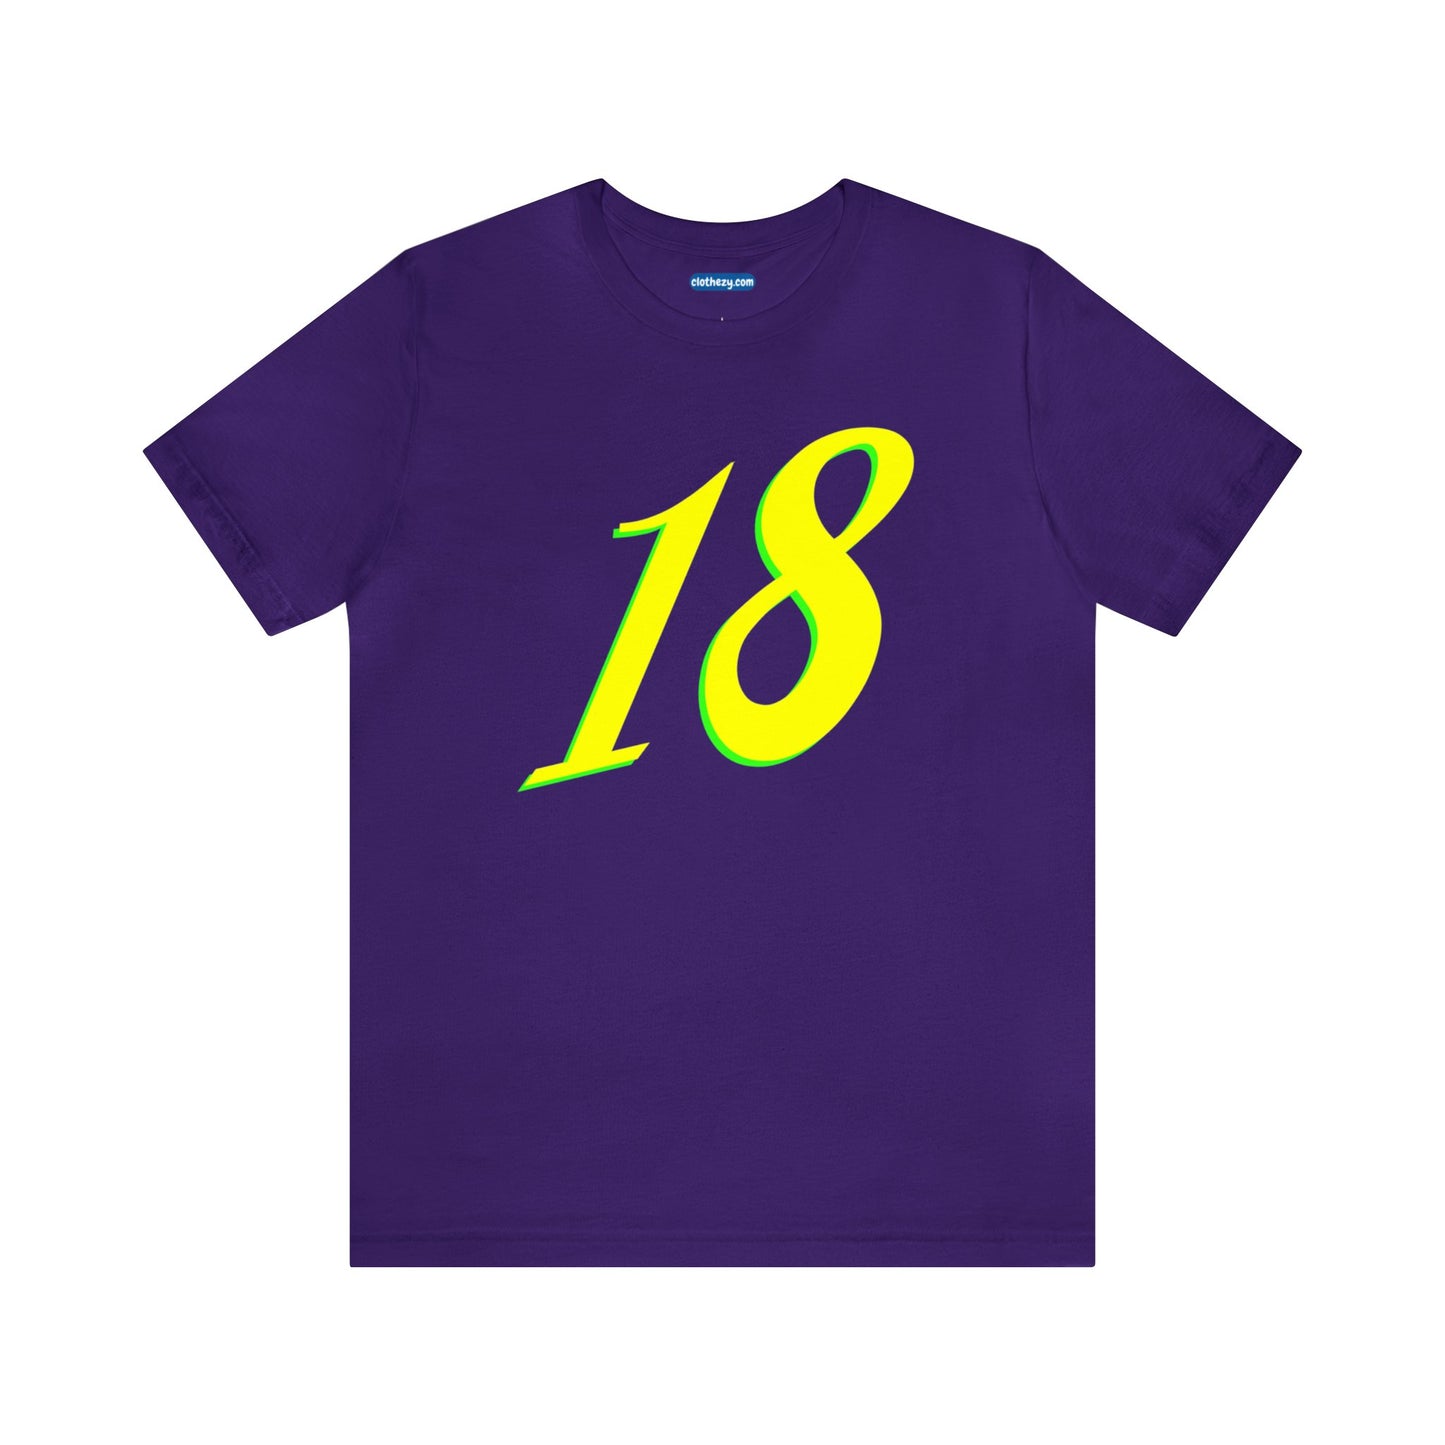 Number 18 Design - Soft Cotton Tee for birthdays and celebrations, Gift for friends and family, Multiple Options by clothezy.com in Purple Size Small - Buy Now